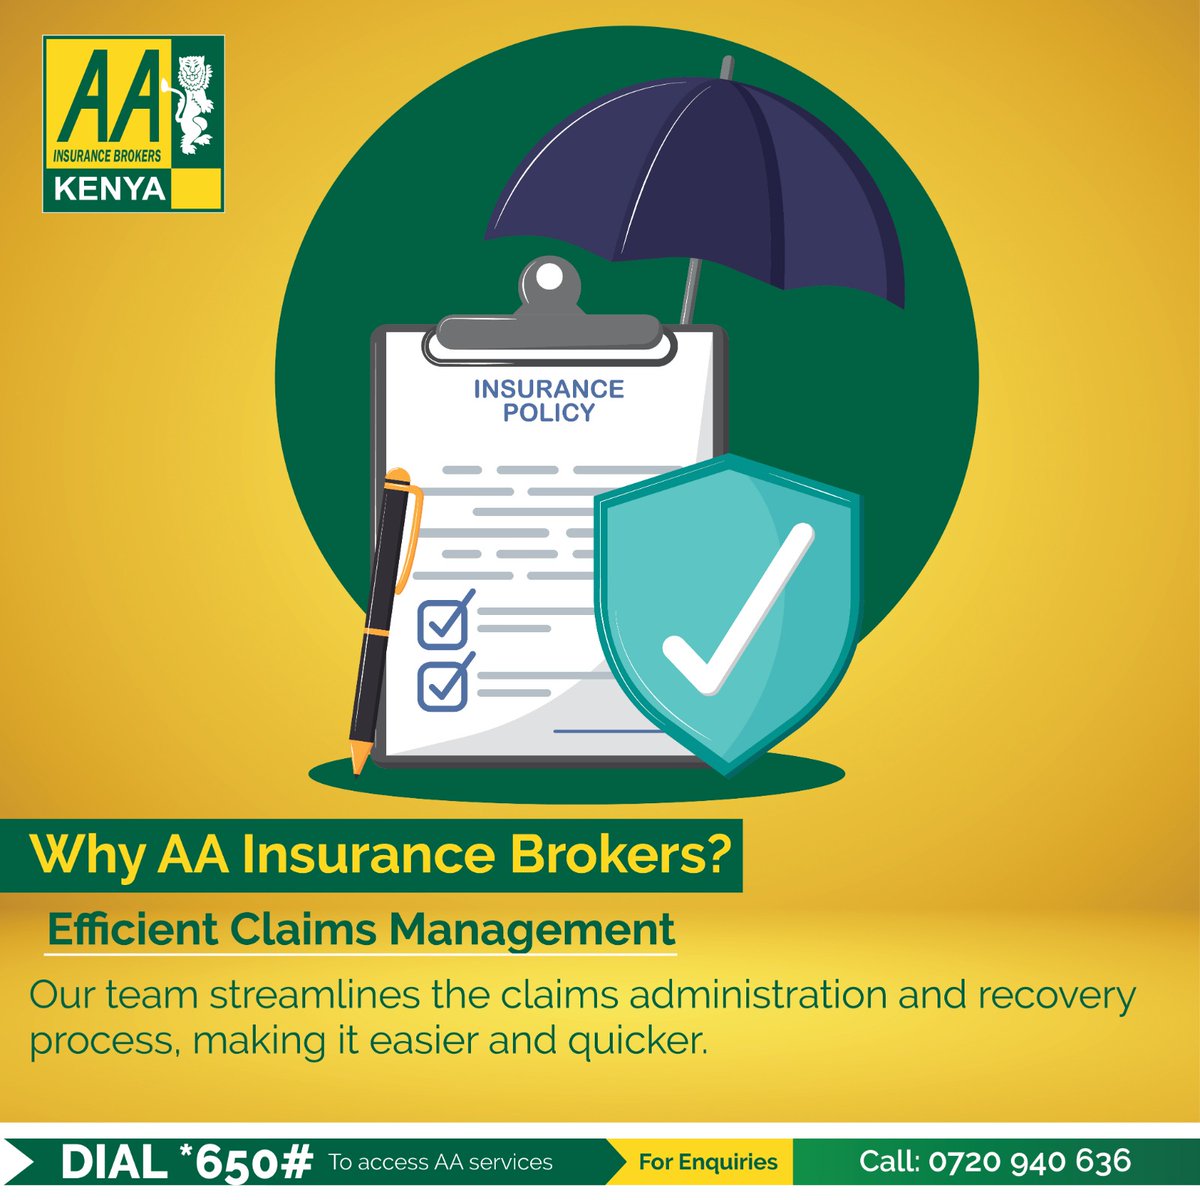 AA Insurance Brokers team makes the claims administration and recovery process easier and quicker. We ensure strict adherence to the SLAs we have with most underwriters, and constant follow-ups thereby ensuring timely settlement and fairness on claims.
☎️0720 940636
#AAIBCares